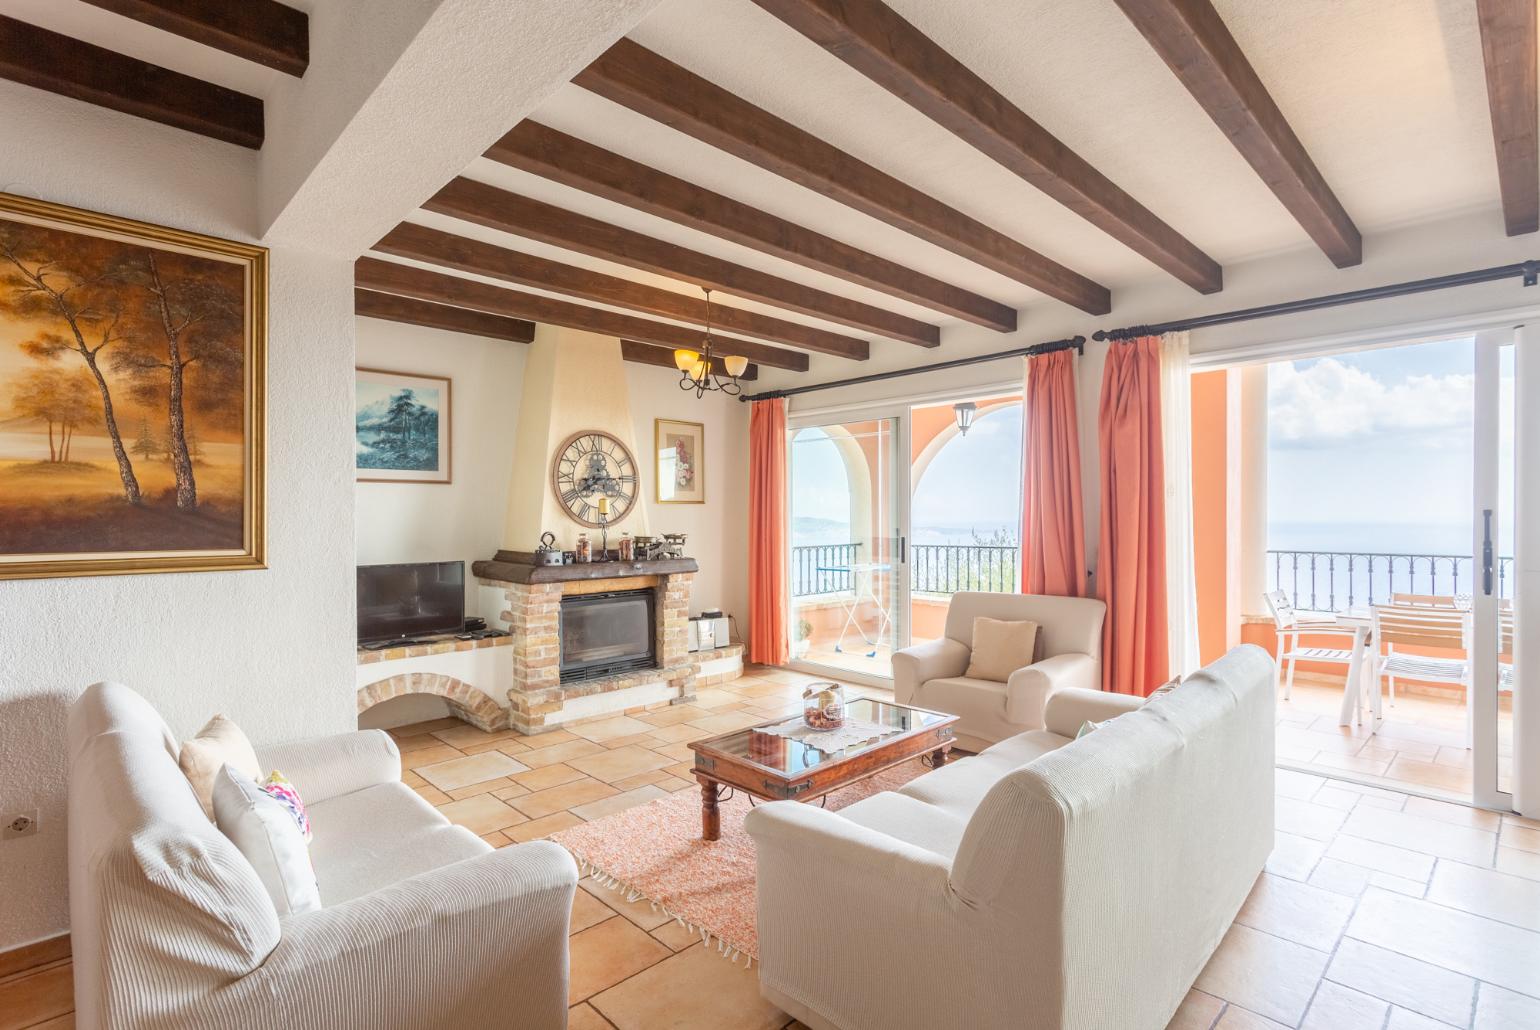 Open-plan living room with sofas, dining areas, kitchen, ornamental fireplace, WiFi internet, satellite TV, and terrace access with panoramic sea views